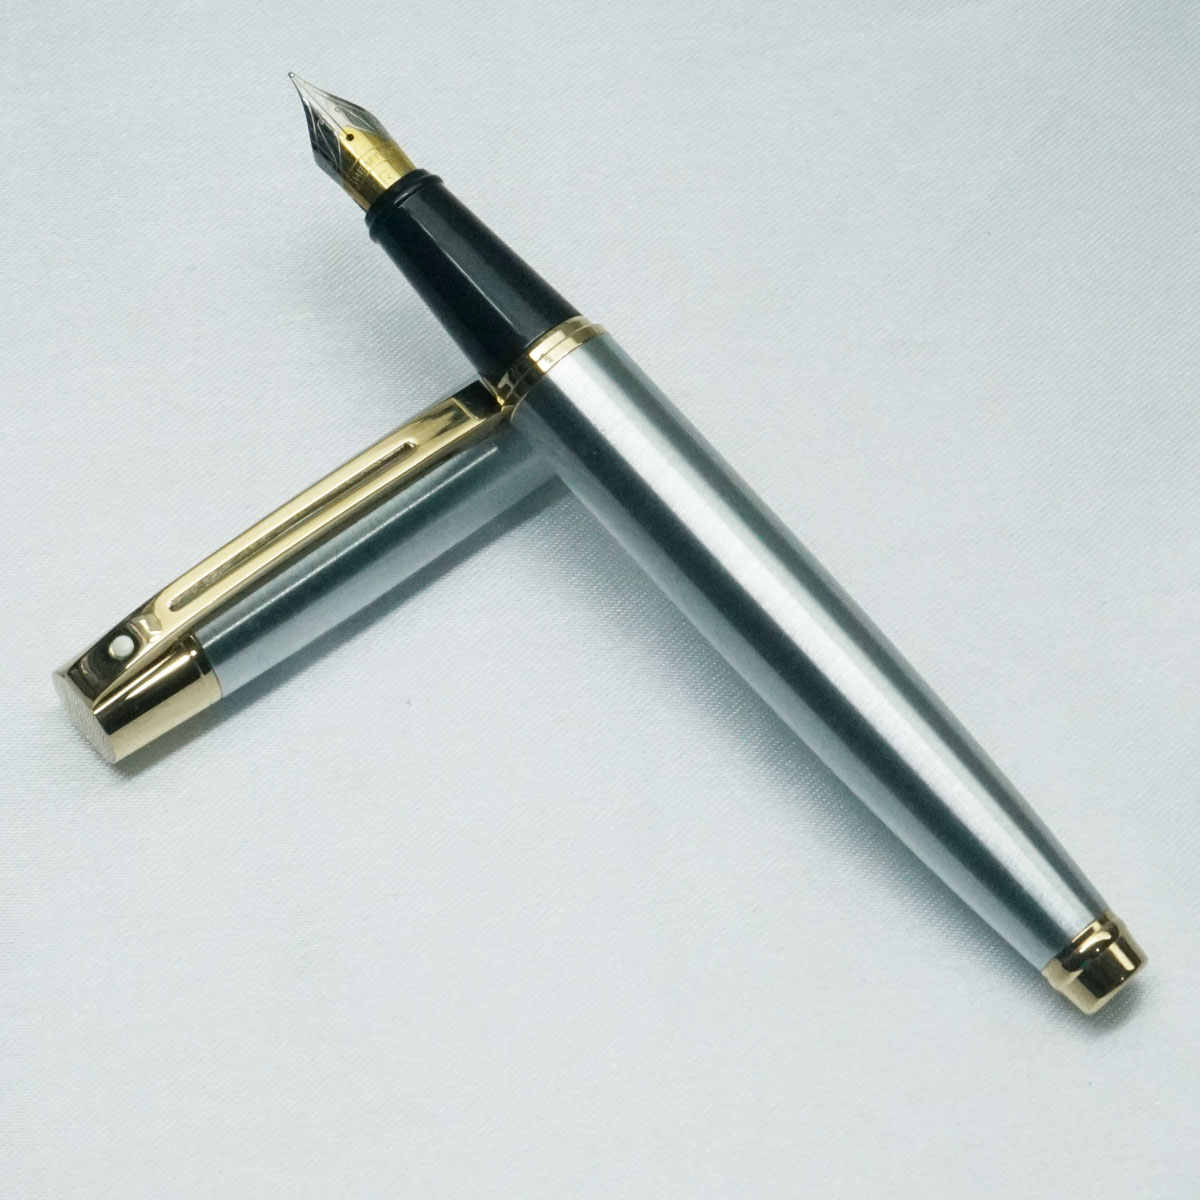 Sheaffer 300 Silver Body and Cap with GT Broad Nib Converter Type Fountain Pen SKU 21444